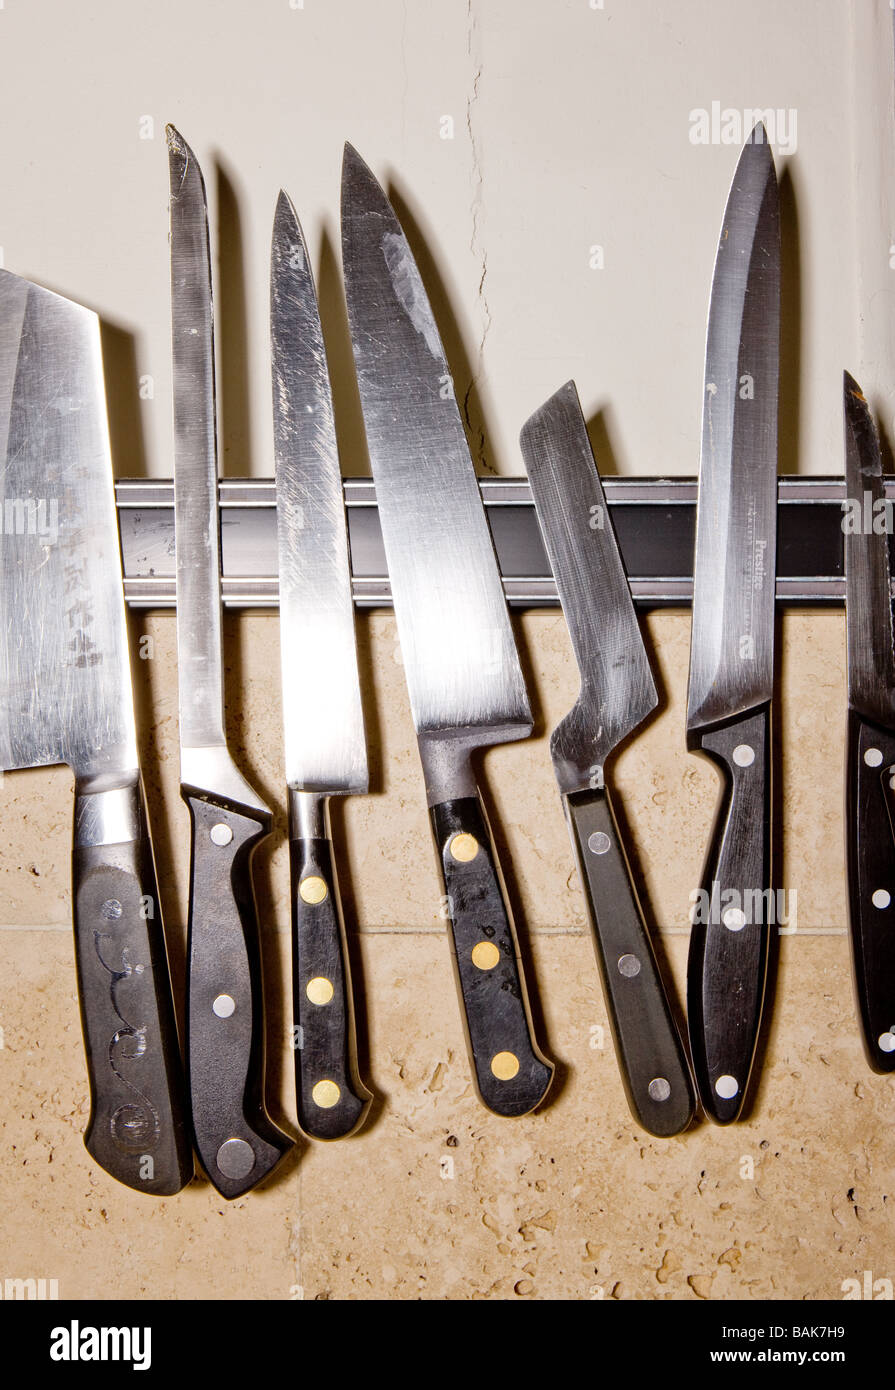 A rack of knives in a kitchen Stock Photo